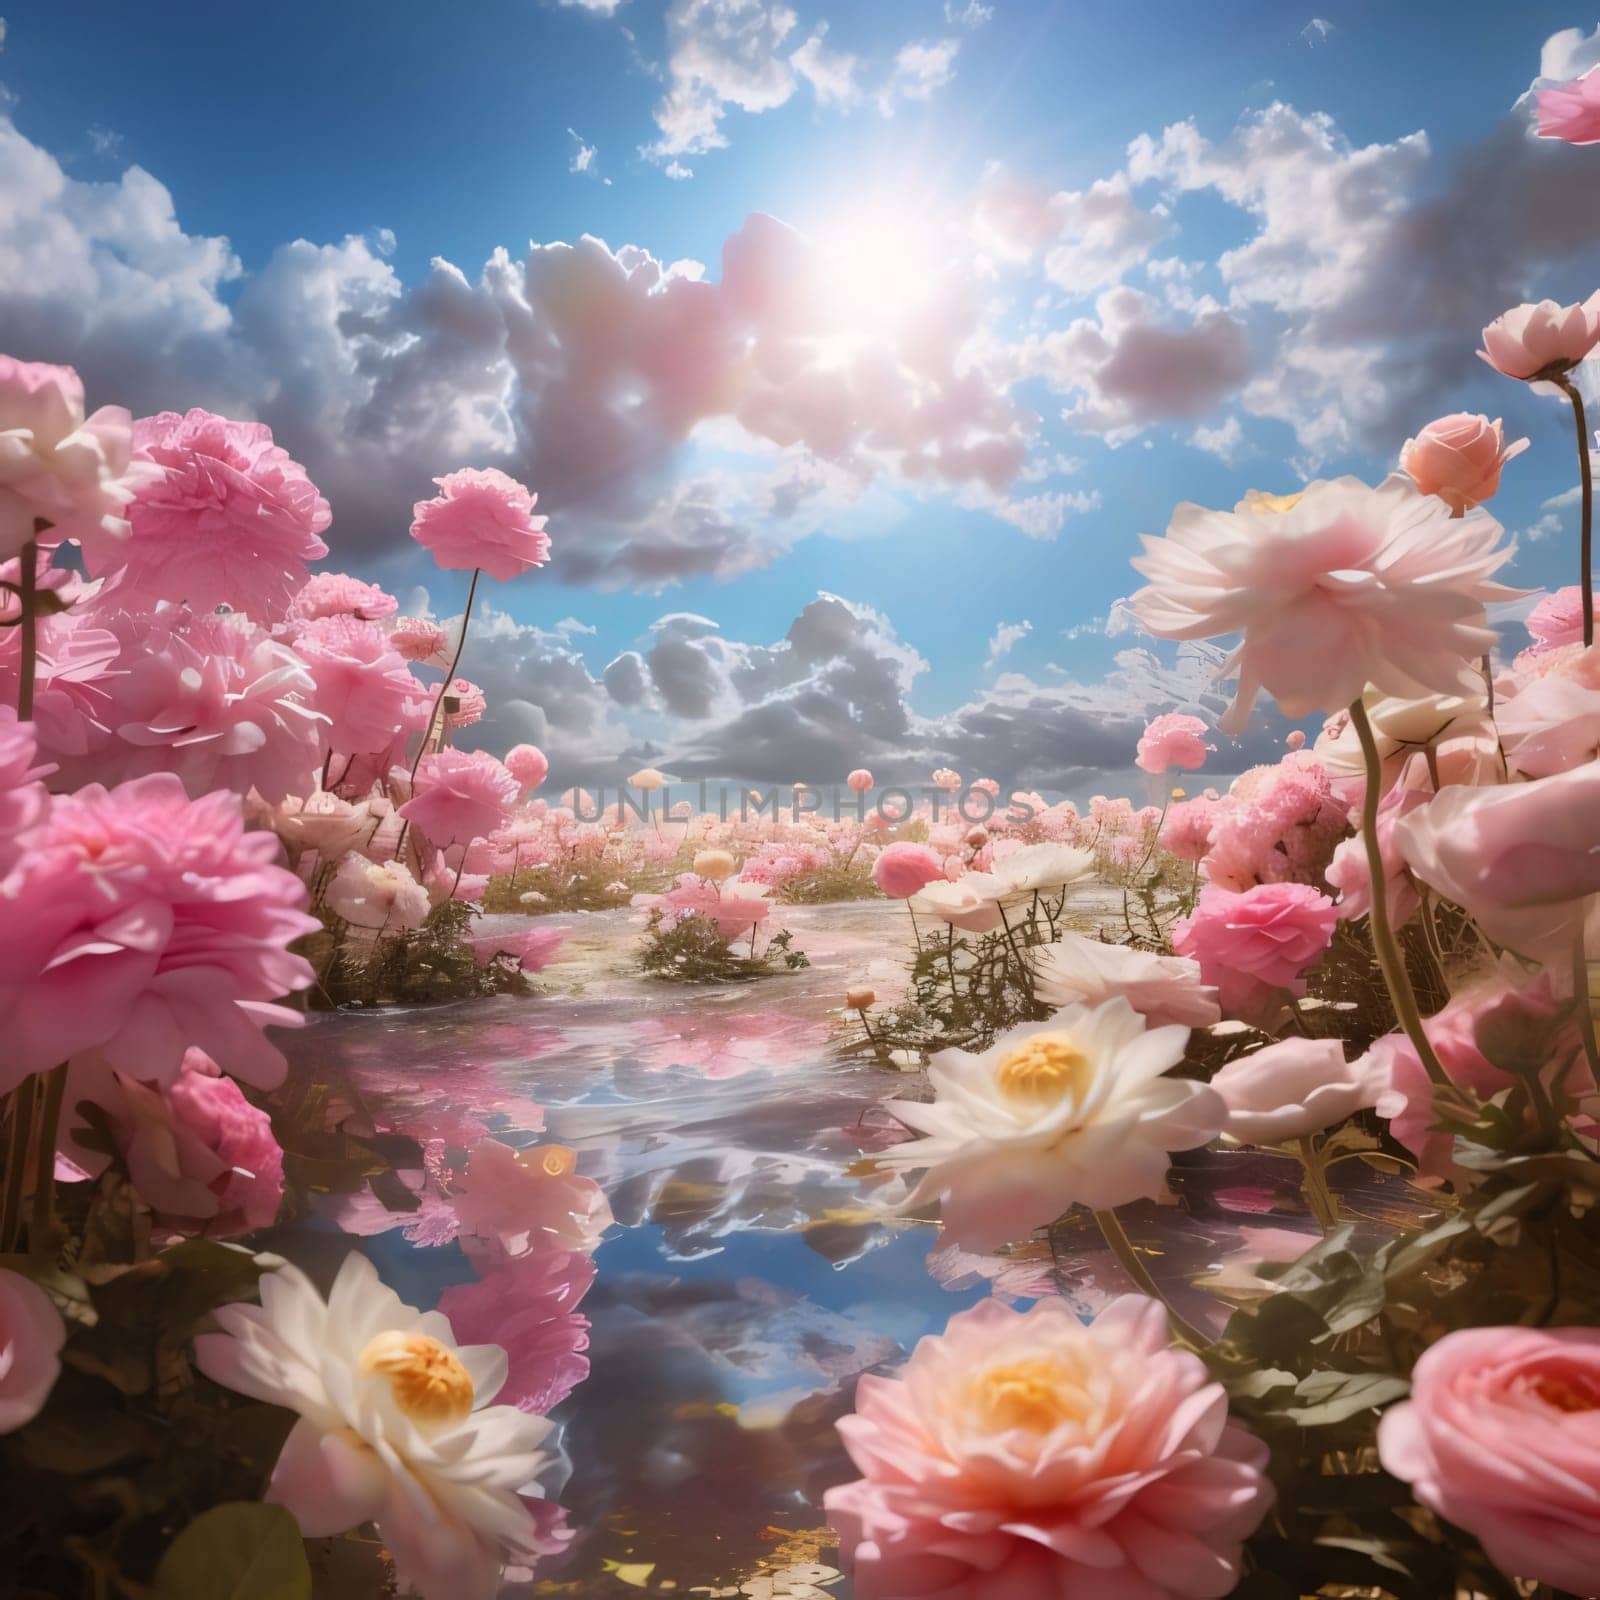 View with white pink flowers, in the middle a stream, sky and sun. Flowering flowers, a symbol of spring, new life. A joyful time of nature waking up to life.